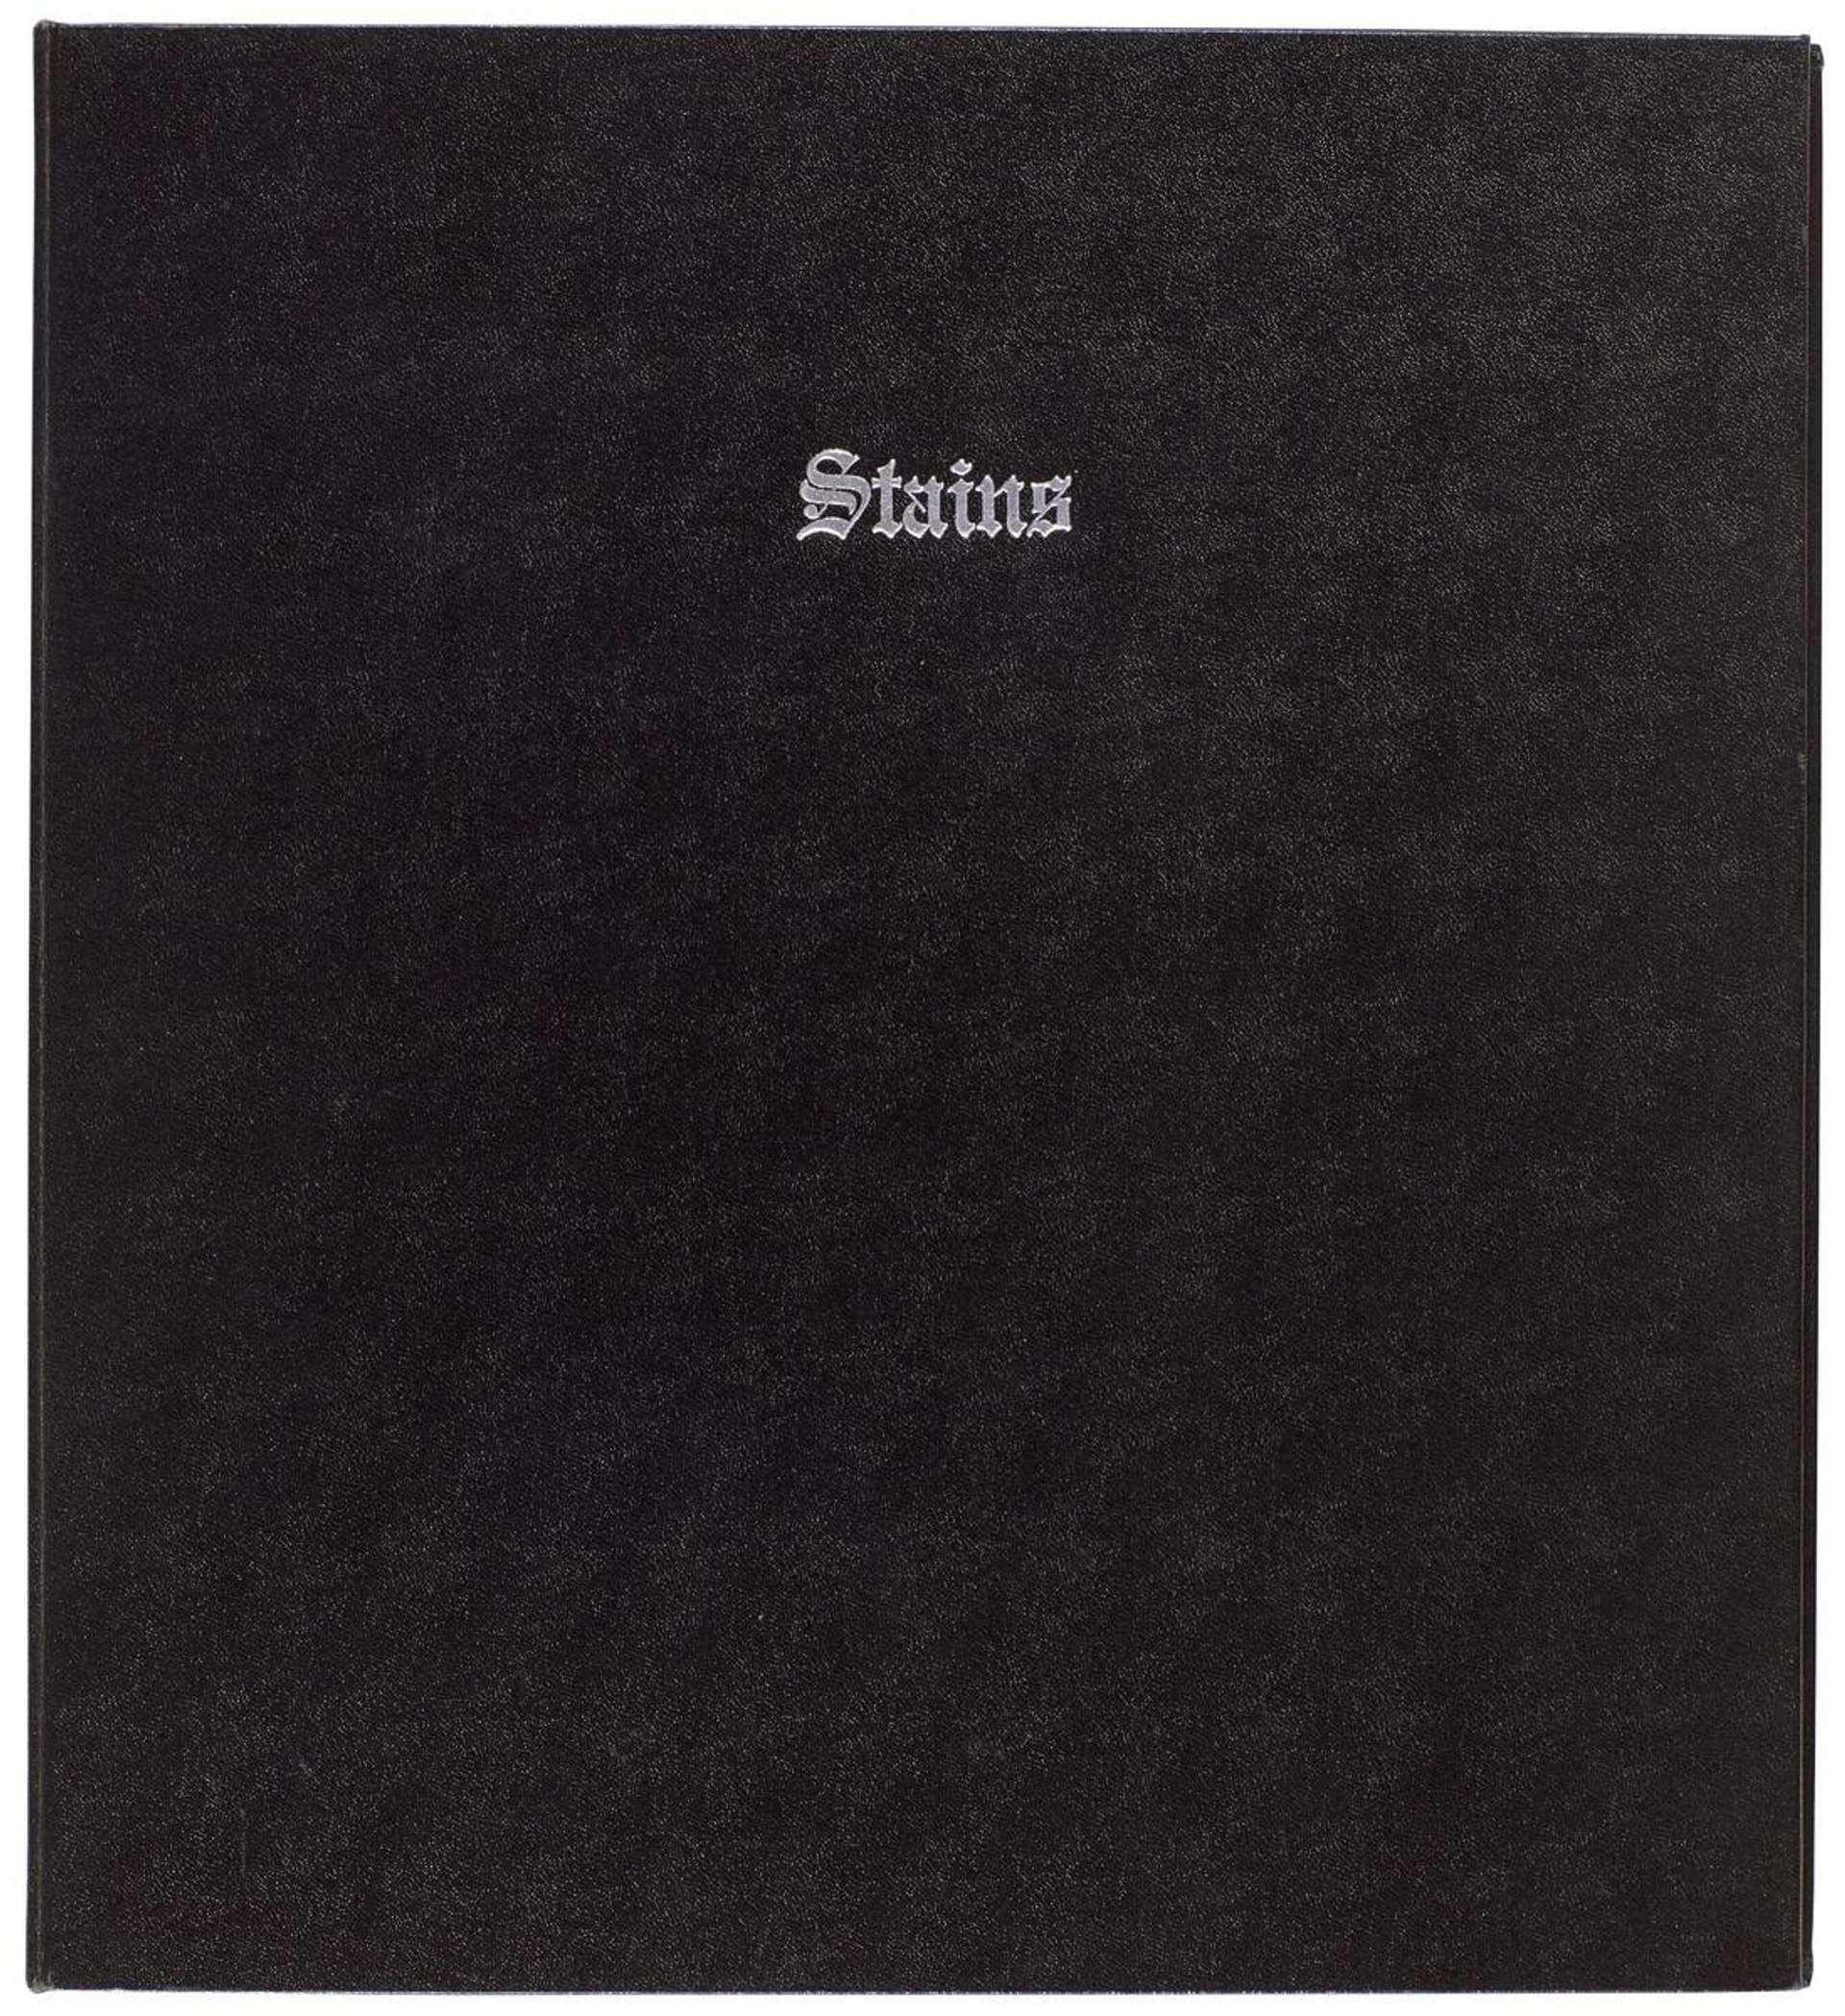 Ed Ruscha: Stains - Signed Mixed Media